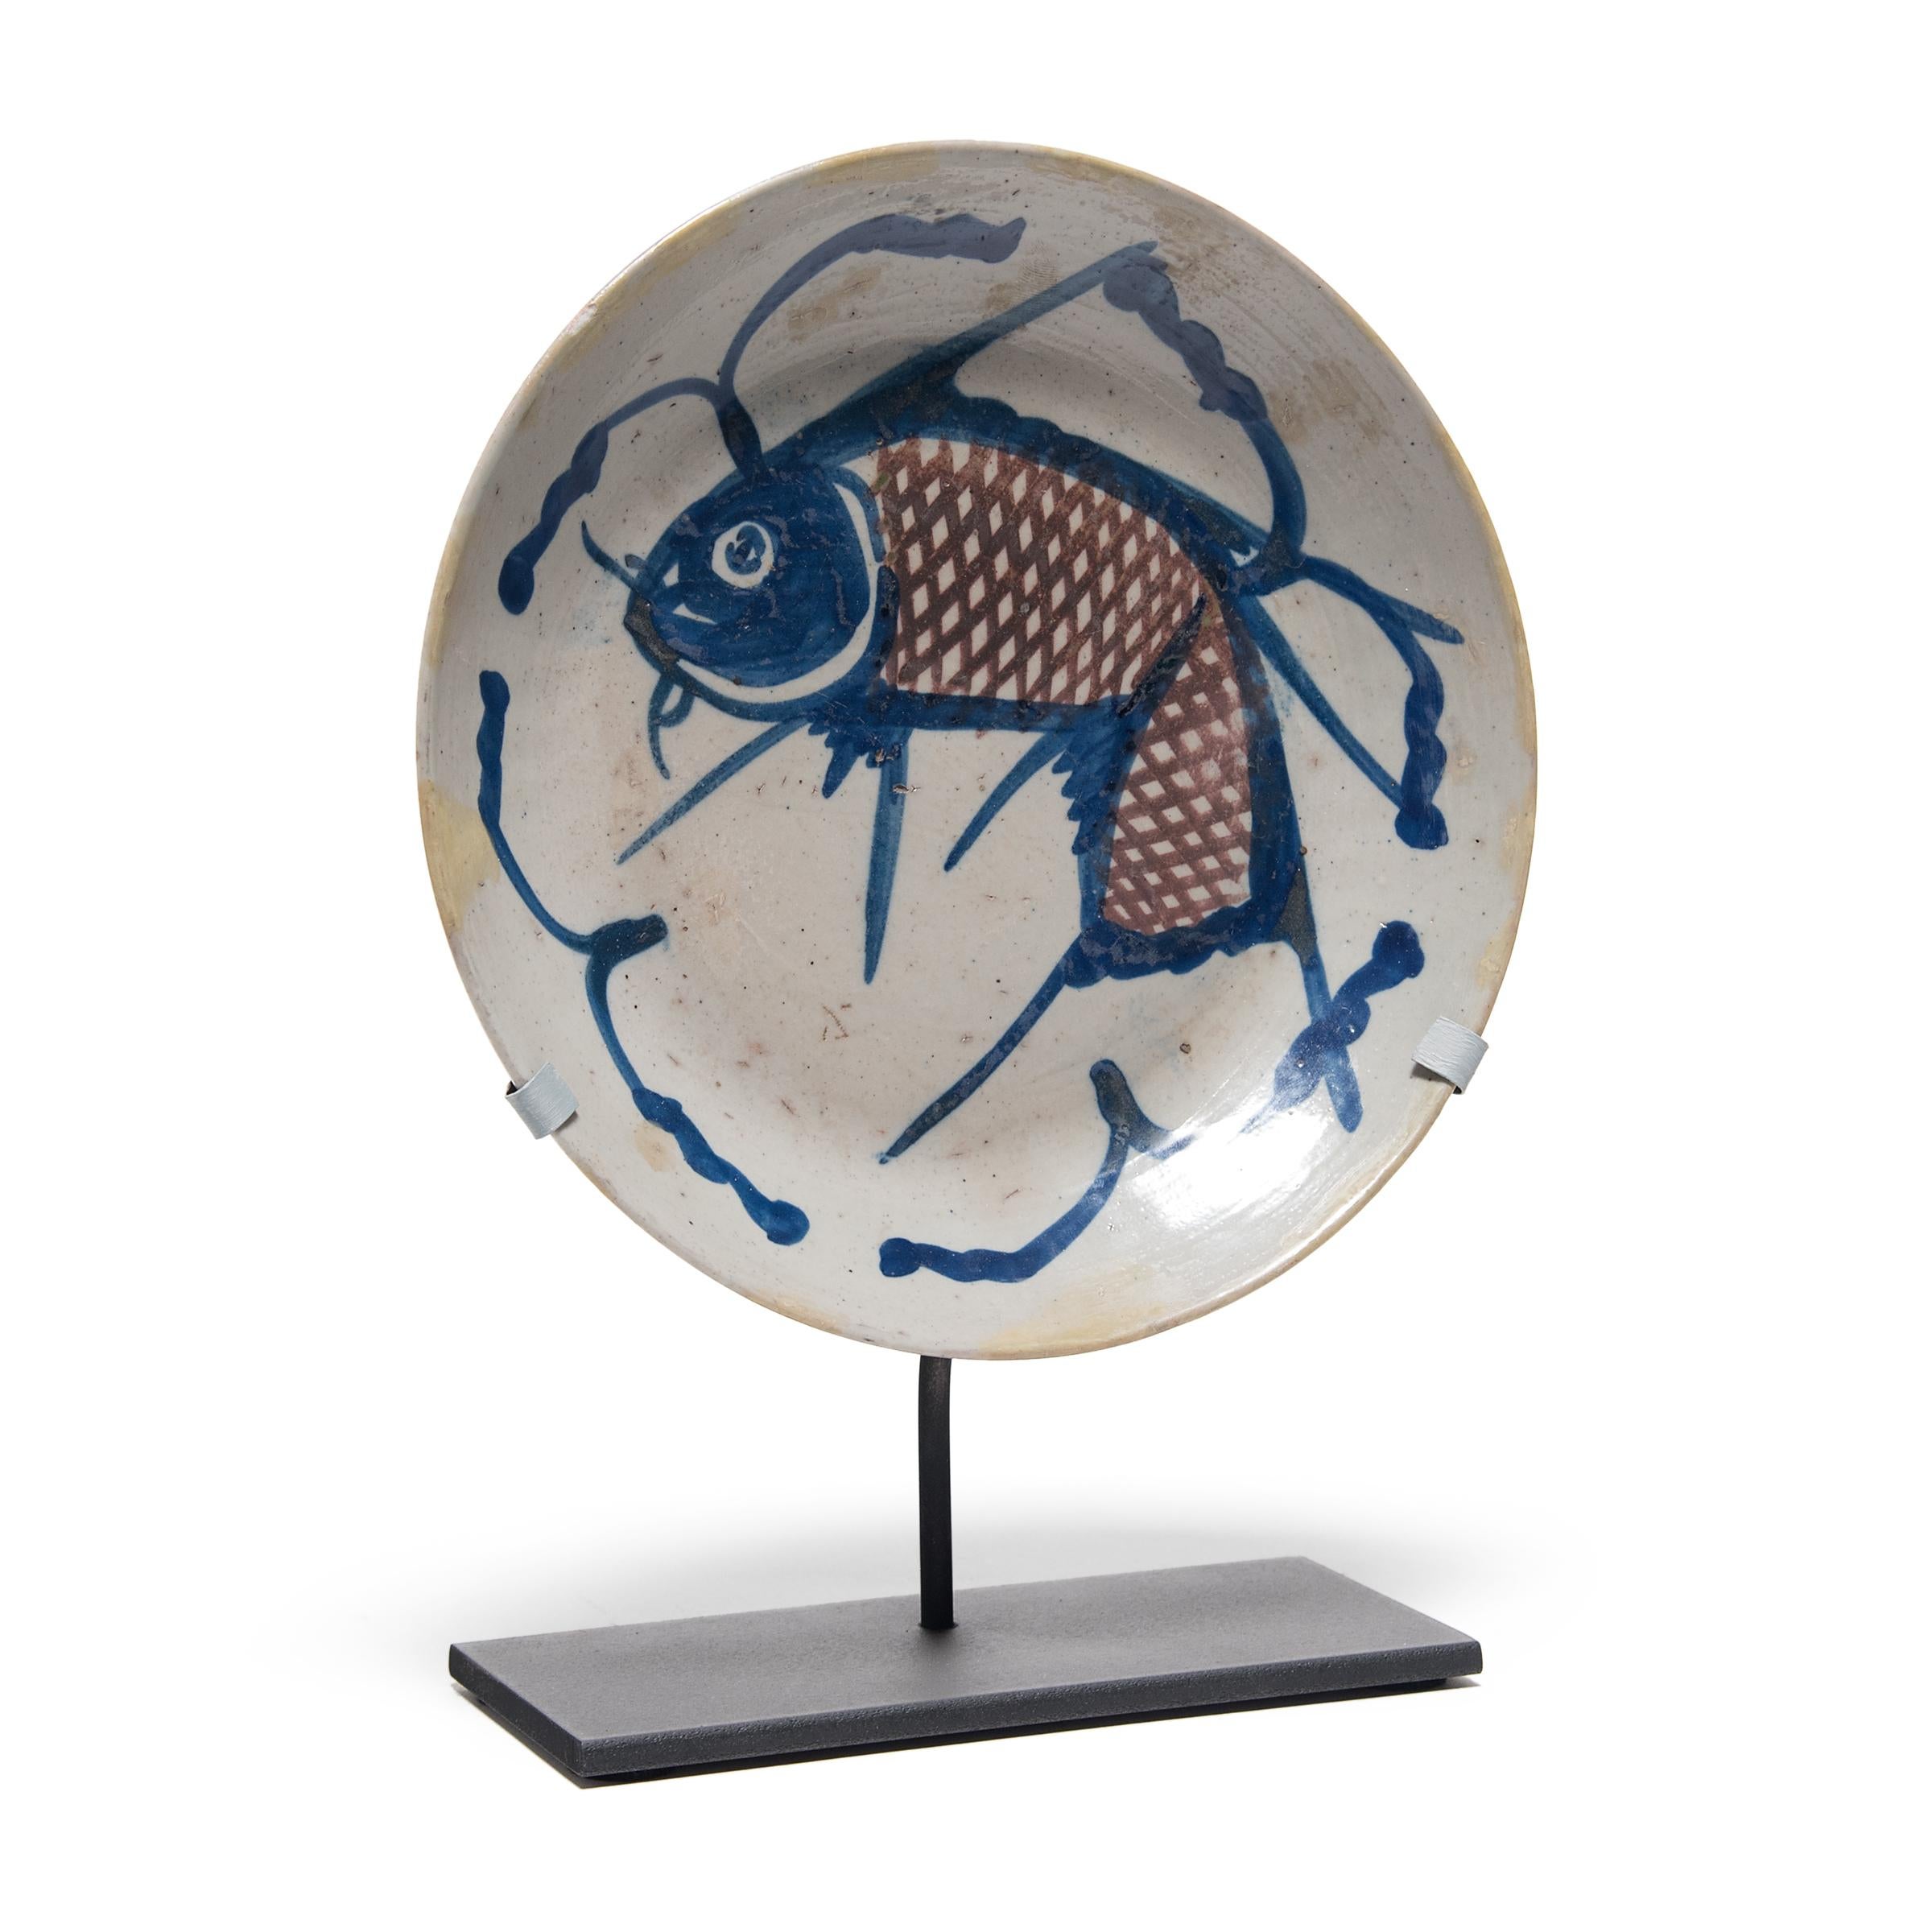 A traditional motif in Chinese art, the fish on this hand painted 19th century provincial plate represents a blessing for wealth. Chinese symbols take on added meaning and nuance when seen in combination. In this plate, the decorative blue lines